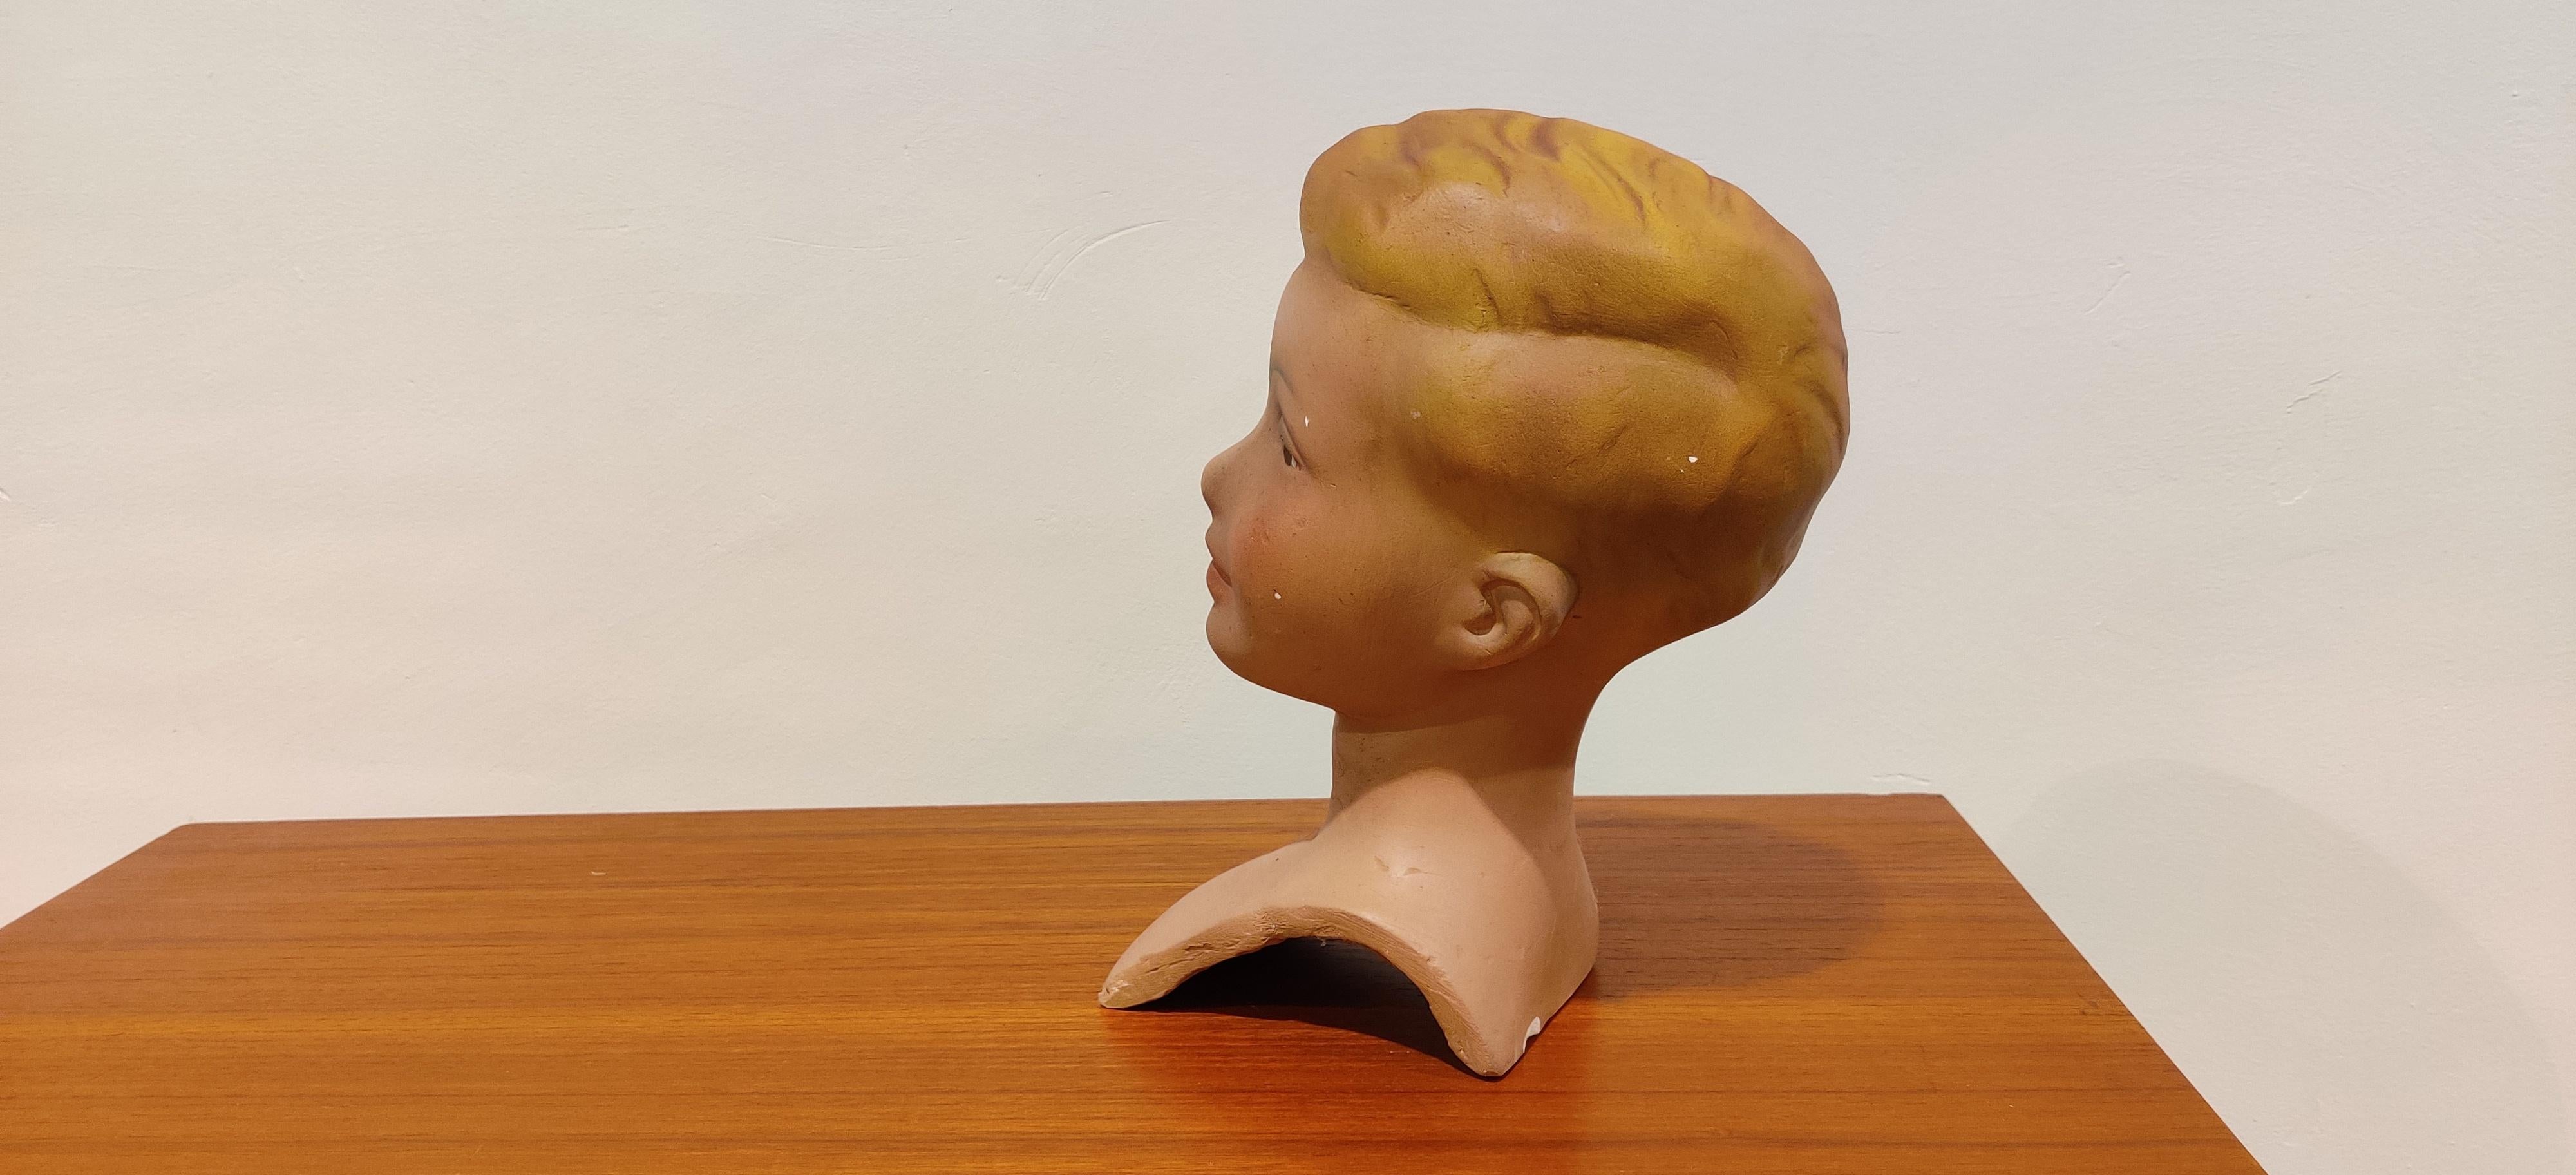 Beautiful child mannequin head made from plaster.

It has some minor user traces.

Comes from a lot acquired from a clothes shop that stopped activities.

Great decorative item to display glasses, hats,

France, 1960s

Measures: Height